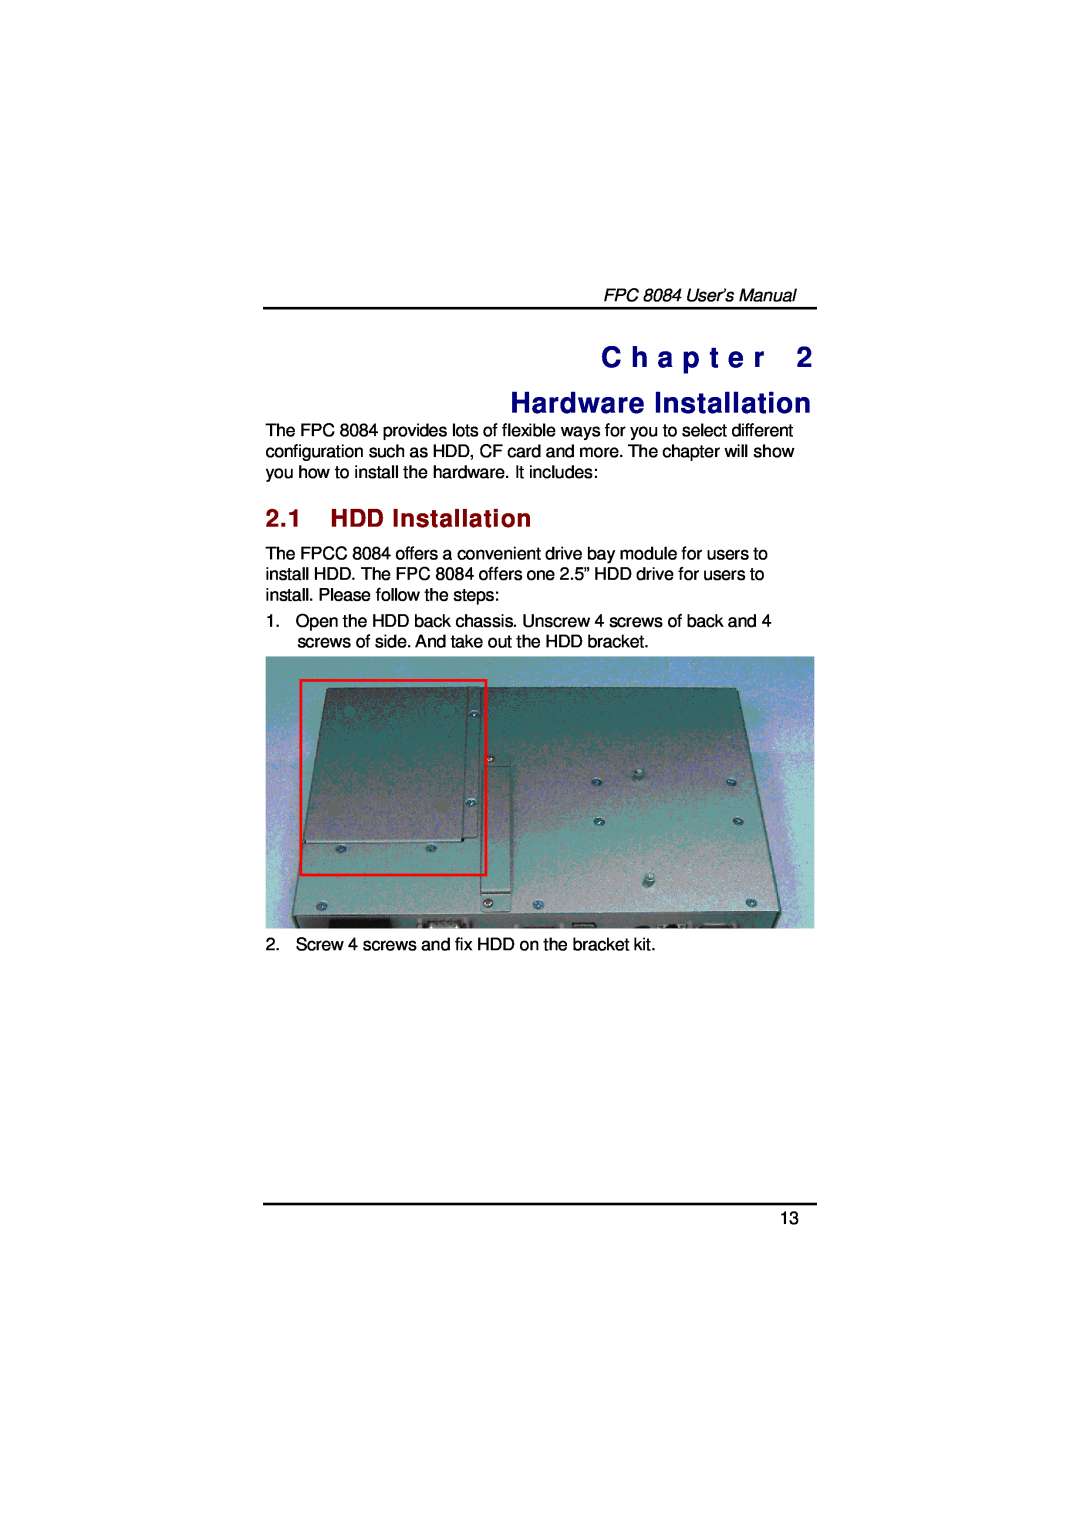 Acnodes user manual C h a p t e r Hardware Installation, 2.1HDD Installation, FPC 8084 User’s Manual 